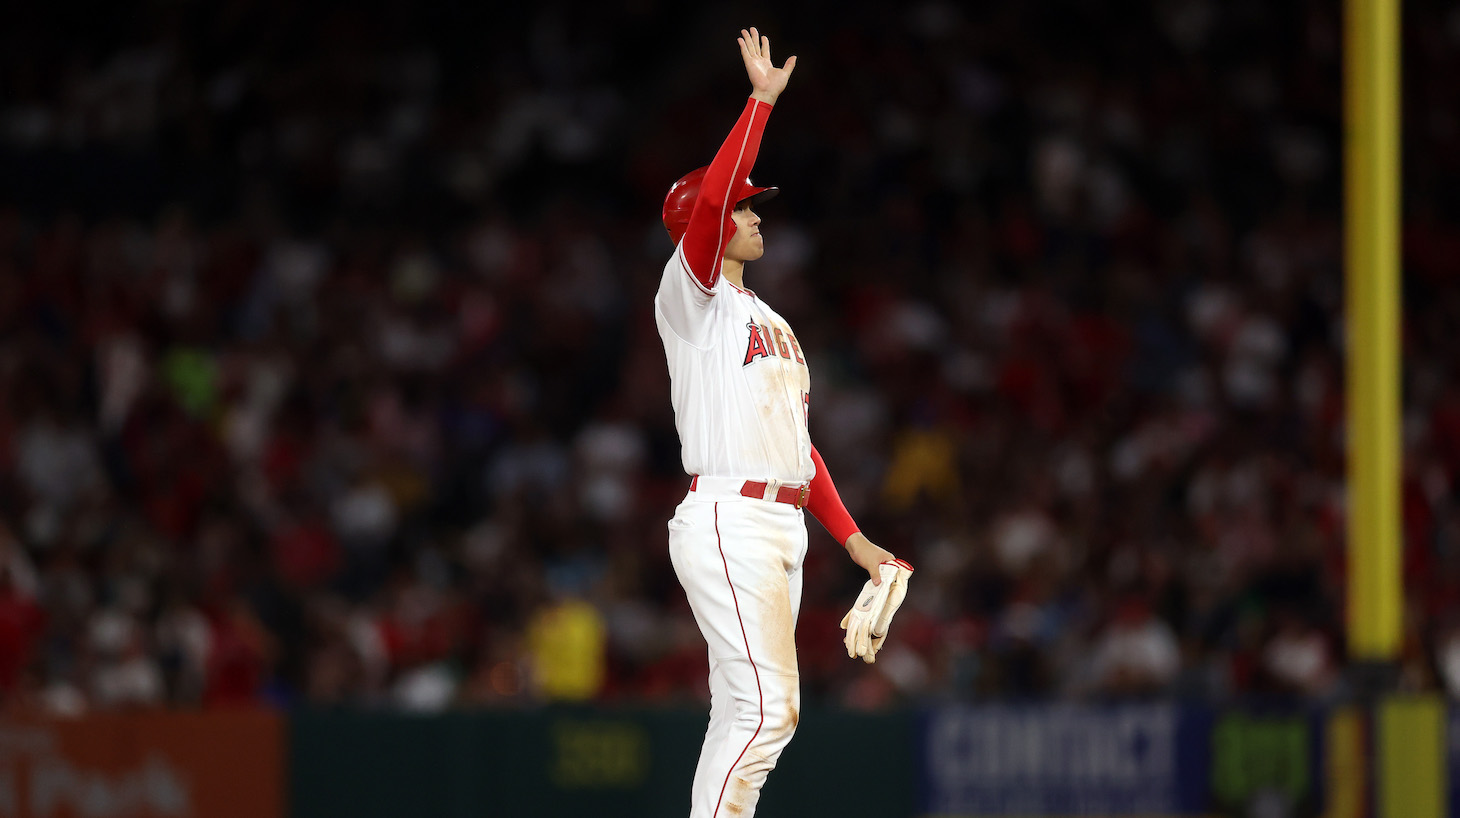 ANAHEIM, CALIFORNIA - JULY 05: Shohei Ohtani #17 of the Los Angeles Angels waves after advancing to second base against the Boston Red Sox in the fifth inning at Angel Stadium of Anaheim on July 05, 2021 in Anaheim, California. (Photo by Ronald Martinez/Getty Images)